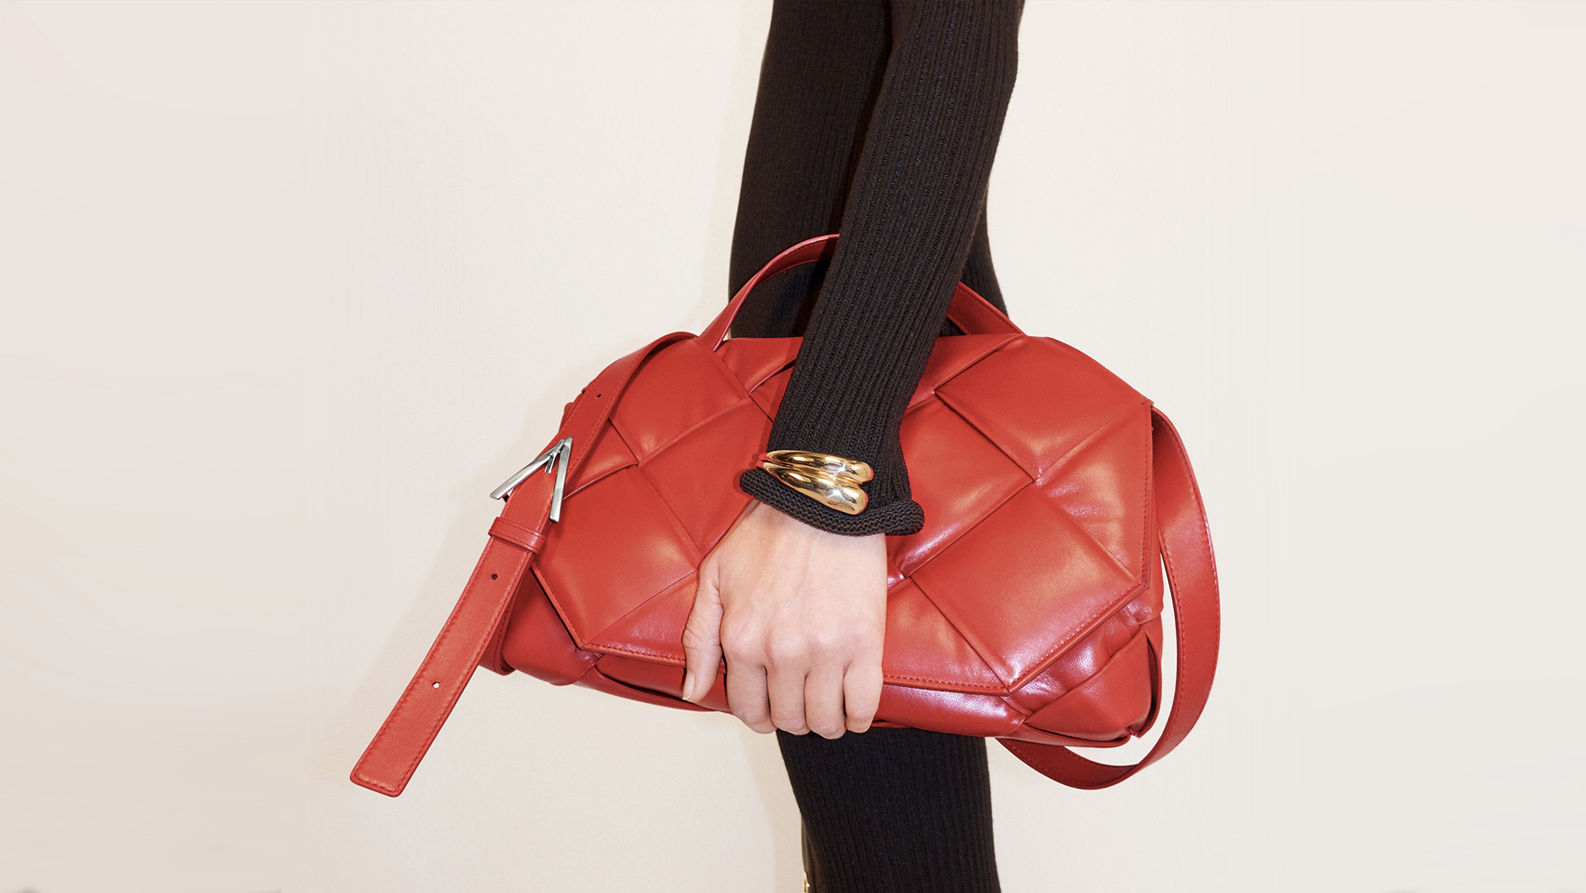 Stained your favourite leather bag? Here's what you should do.